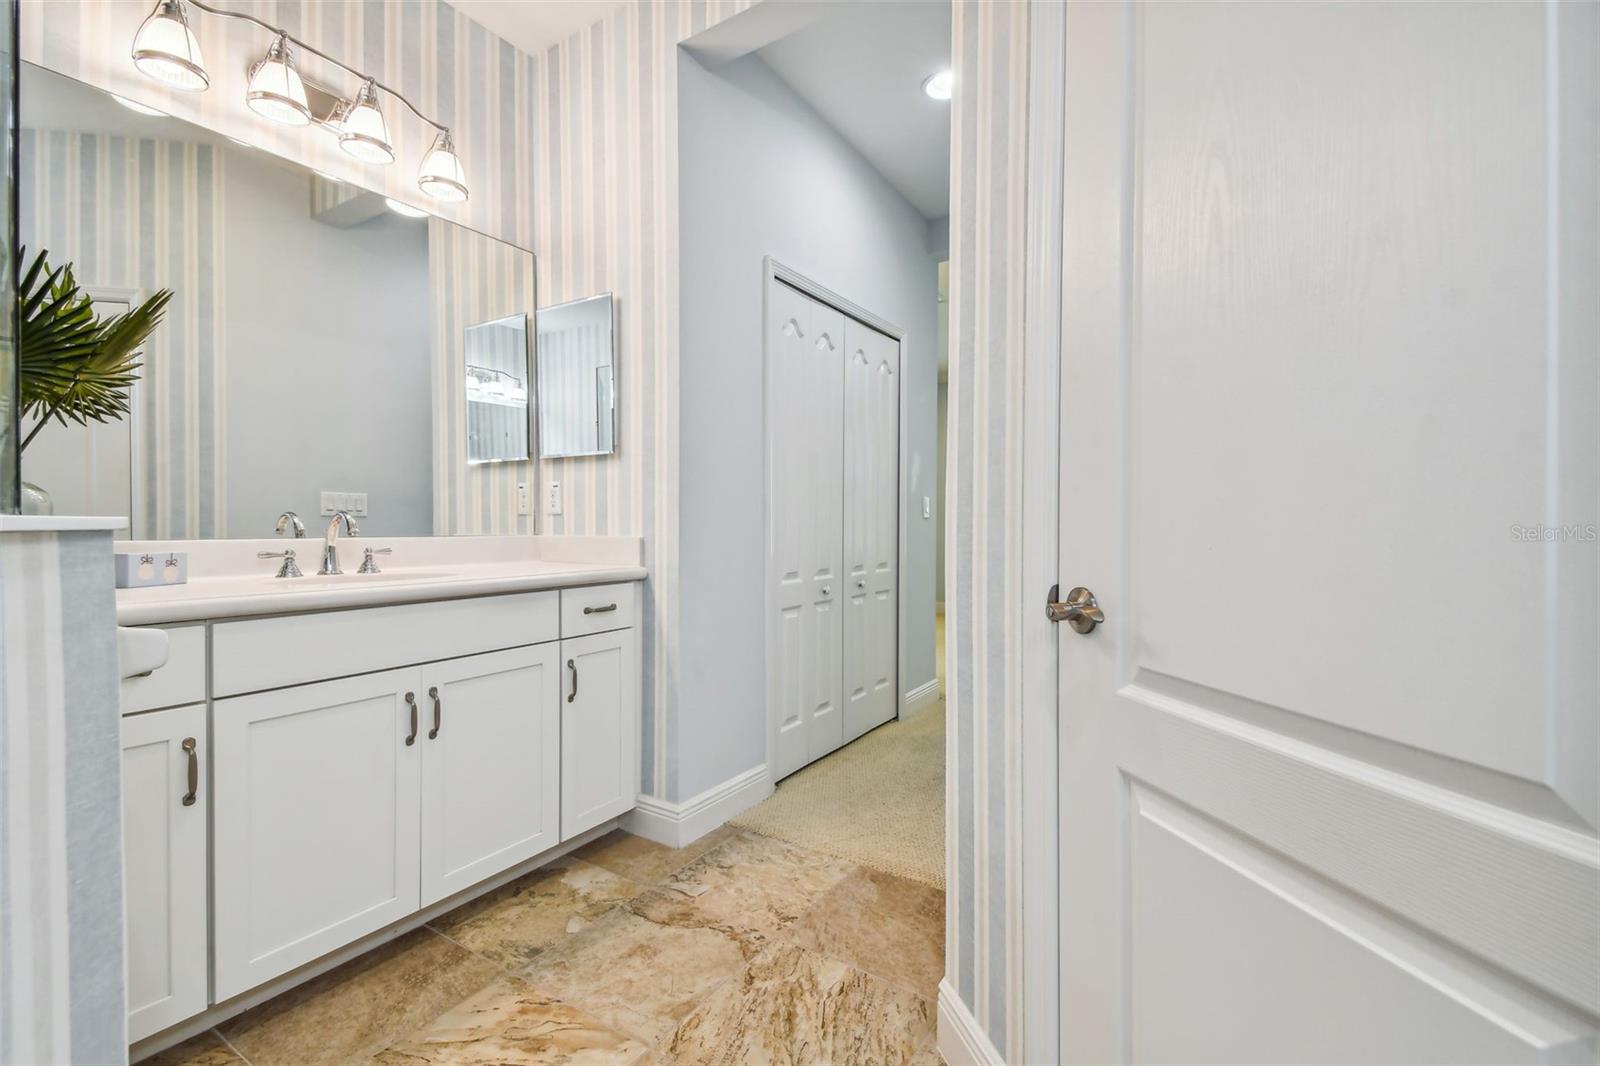 Primary bath with beautiful finishes. Cultured marble counters, designer vanity lights and hardware, elongated water closet, raised panel cabinets, decorator towel bars and fixtures.